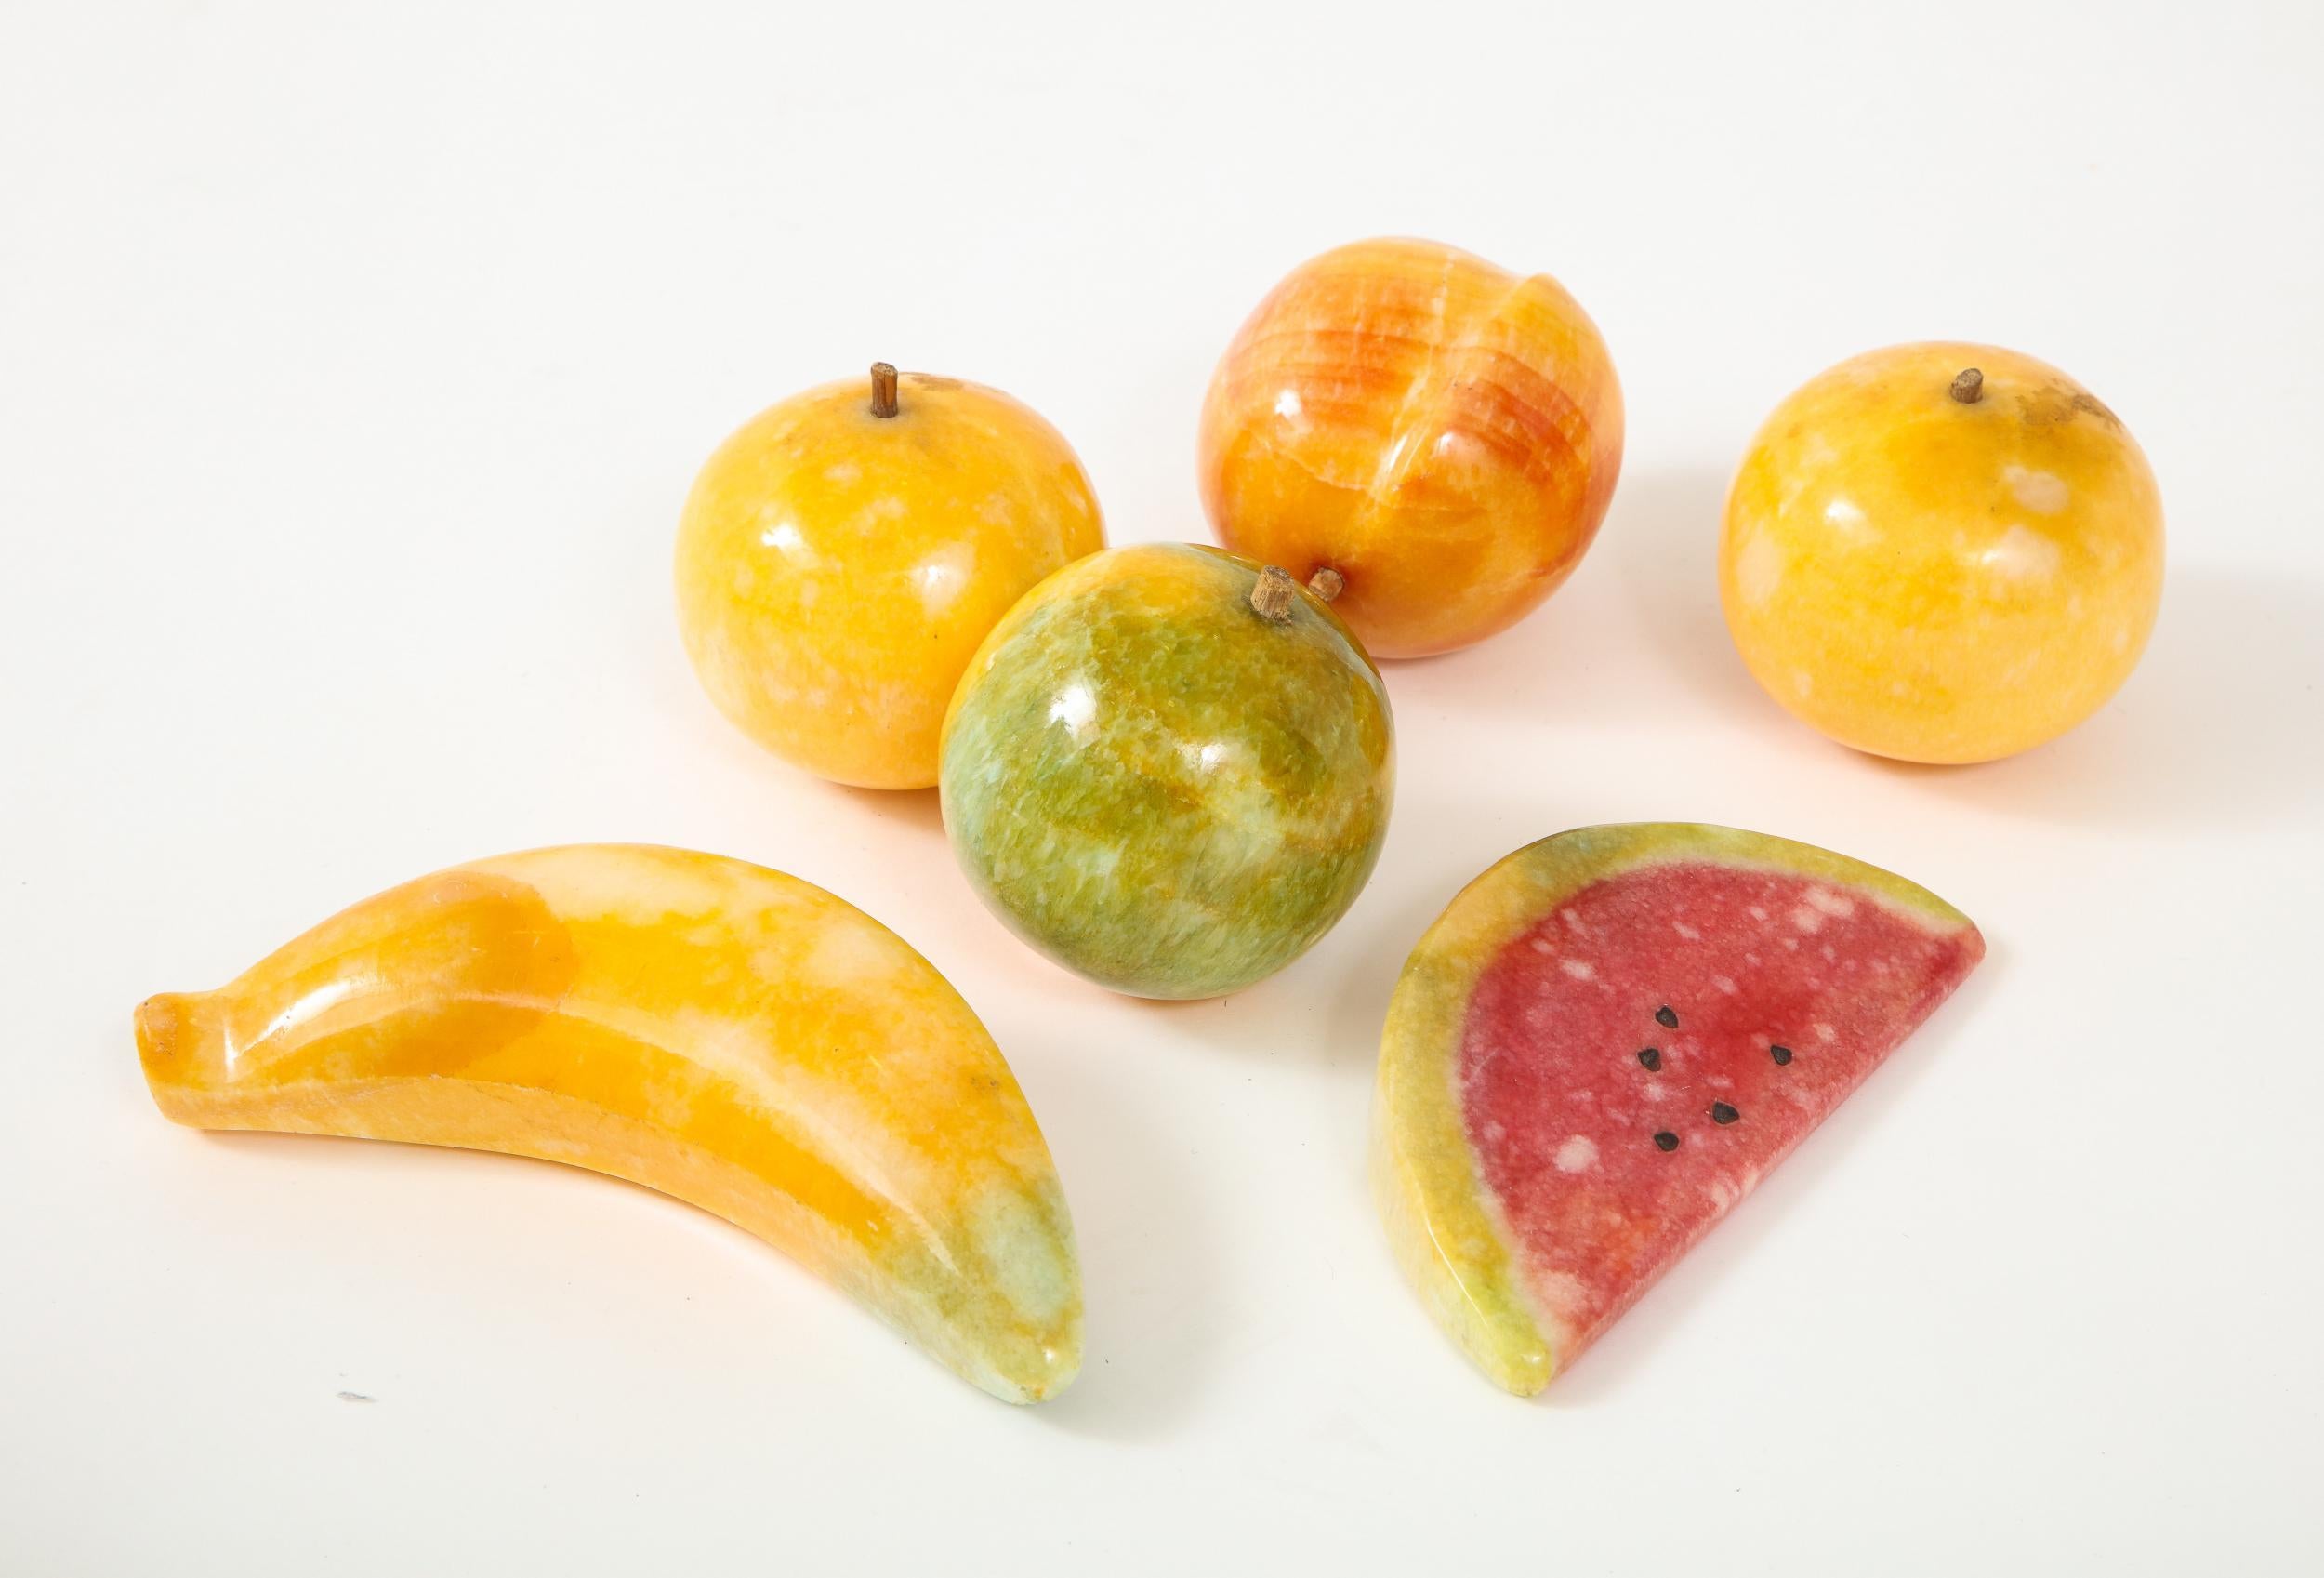 Stone fruit has long been a decorative object across many different artistic periods. This polished set is from the 1970s and includes a highly desirable banana and watermelon as well as one peach, one green apple, and two oranges. Peach and oranges